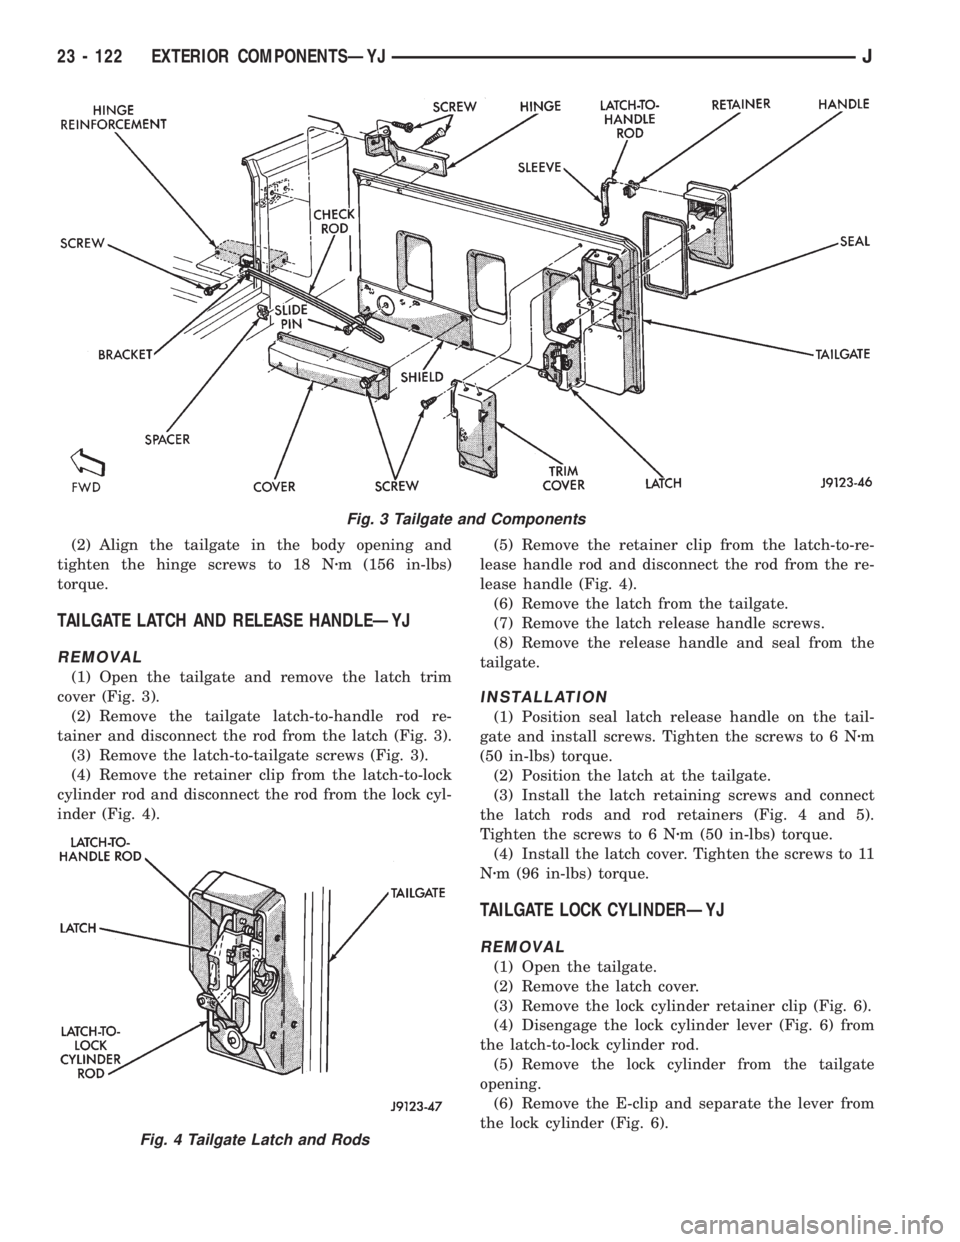 JEEP WRANGLER 1995  Owners Manual Fig. 4 Tailgate Latch and Rods
23 - 122 EXTERIOR COMPONENTSÐYJJ 